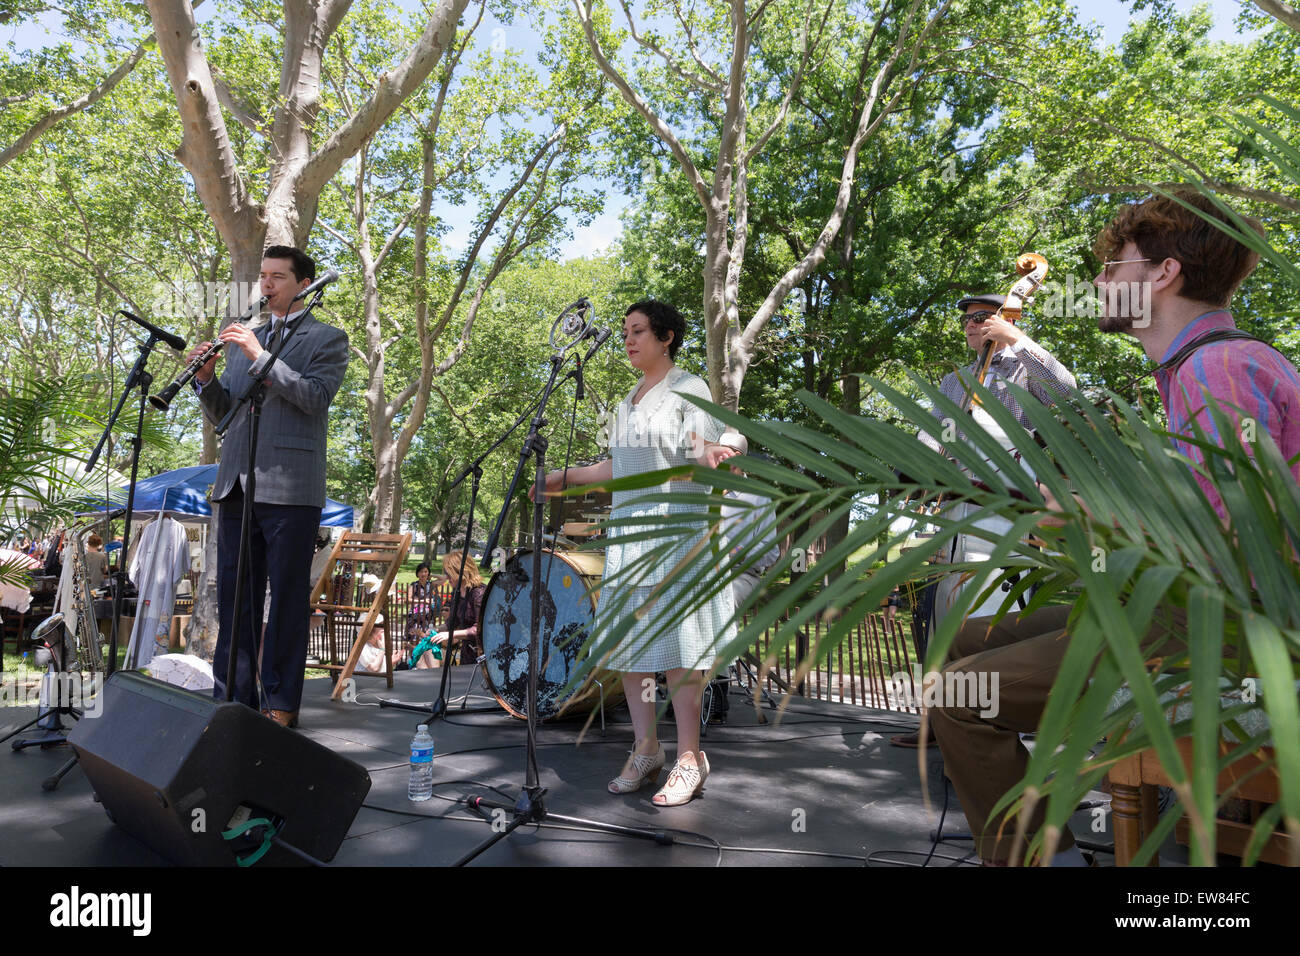 New York, NY - June 14, 2015: Tamar Korn & Kornucopia Band performes at 10th annual Jazz Age lawn party by Michael Arenella & Dreamland Orchestra on Governors Island Stock Photo